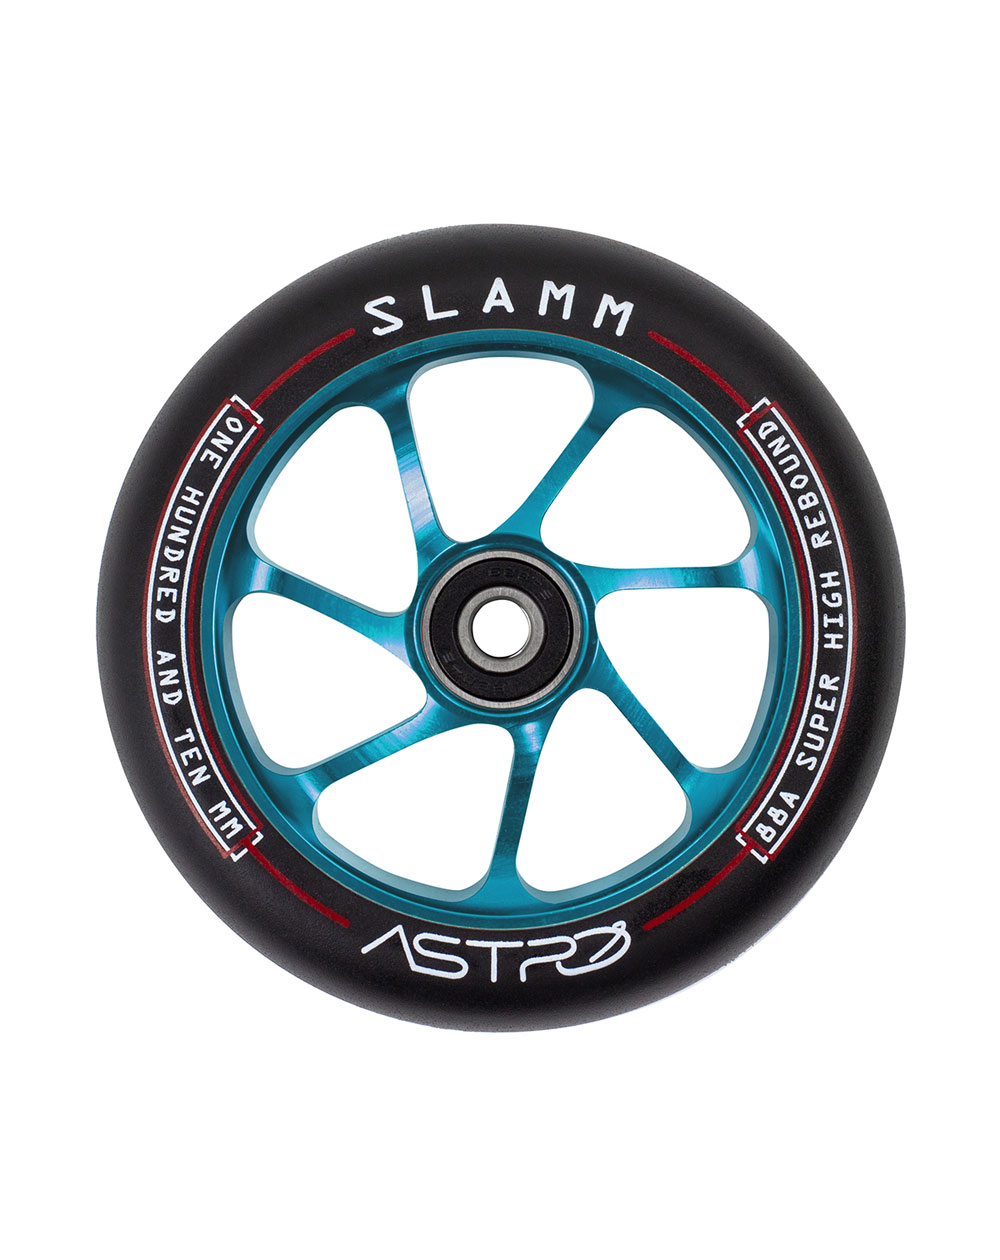 Slamm Scooters Astro 110mm Scooter Rad Blue